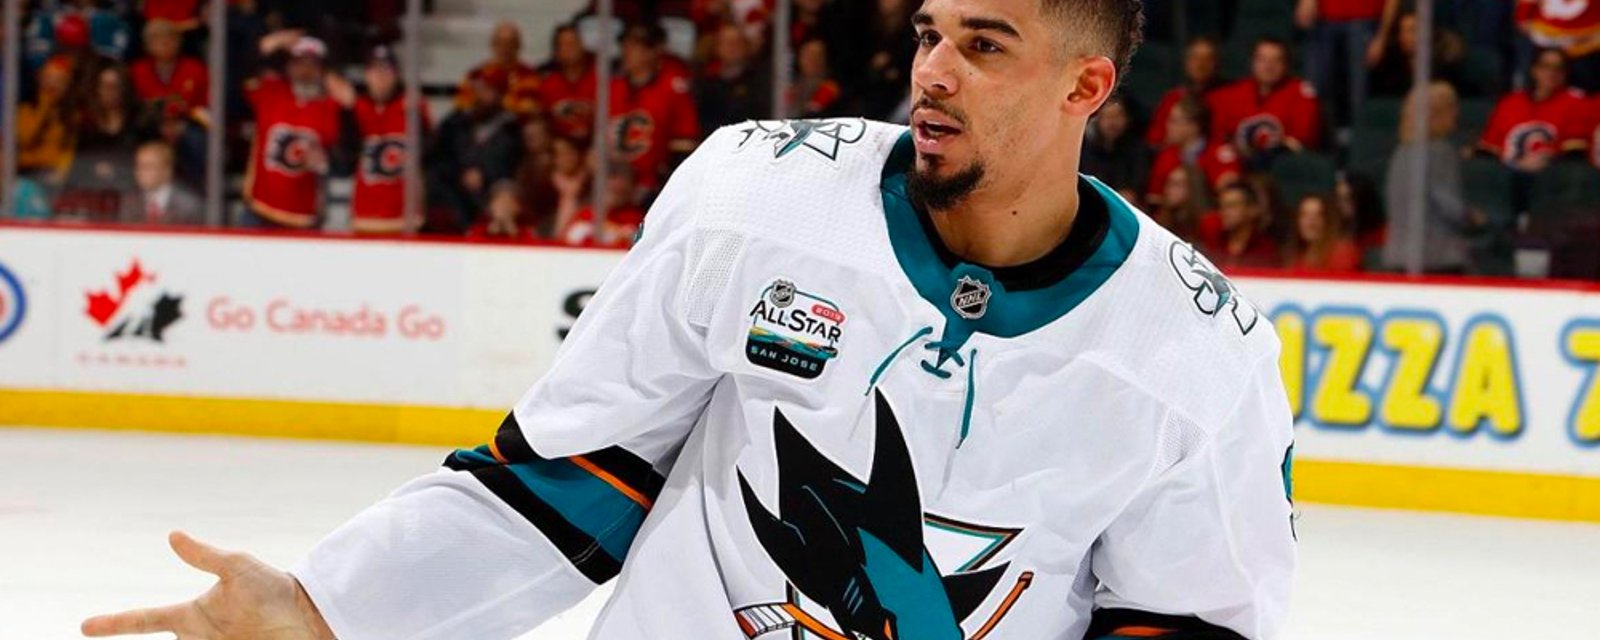 Evander Kane reportedly the source of “significant friction” with Sharks teammates 